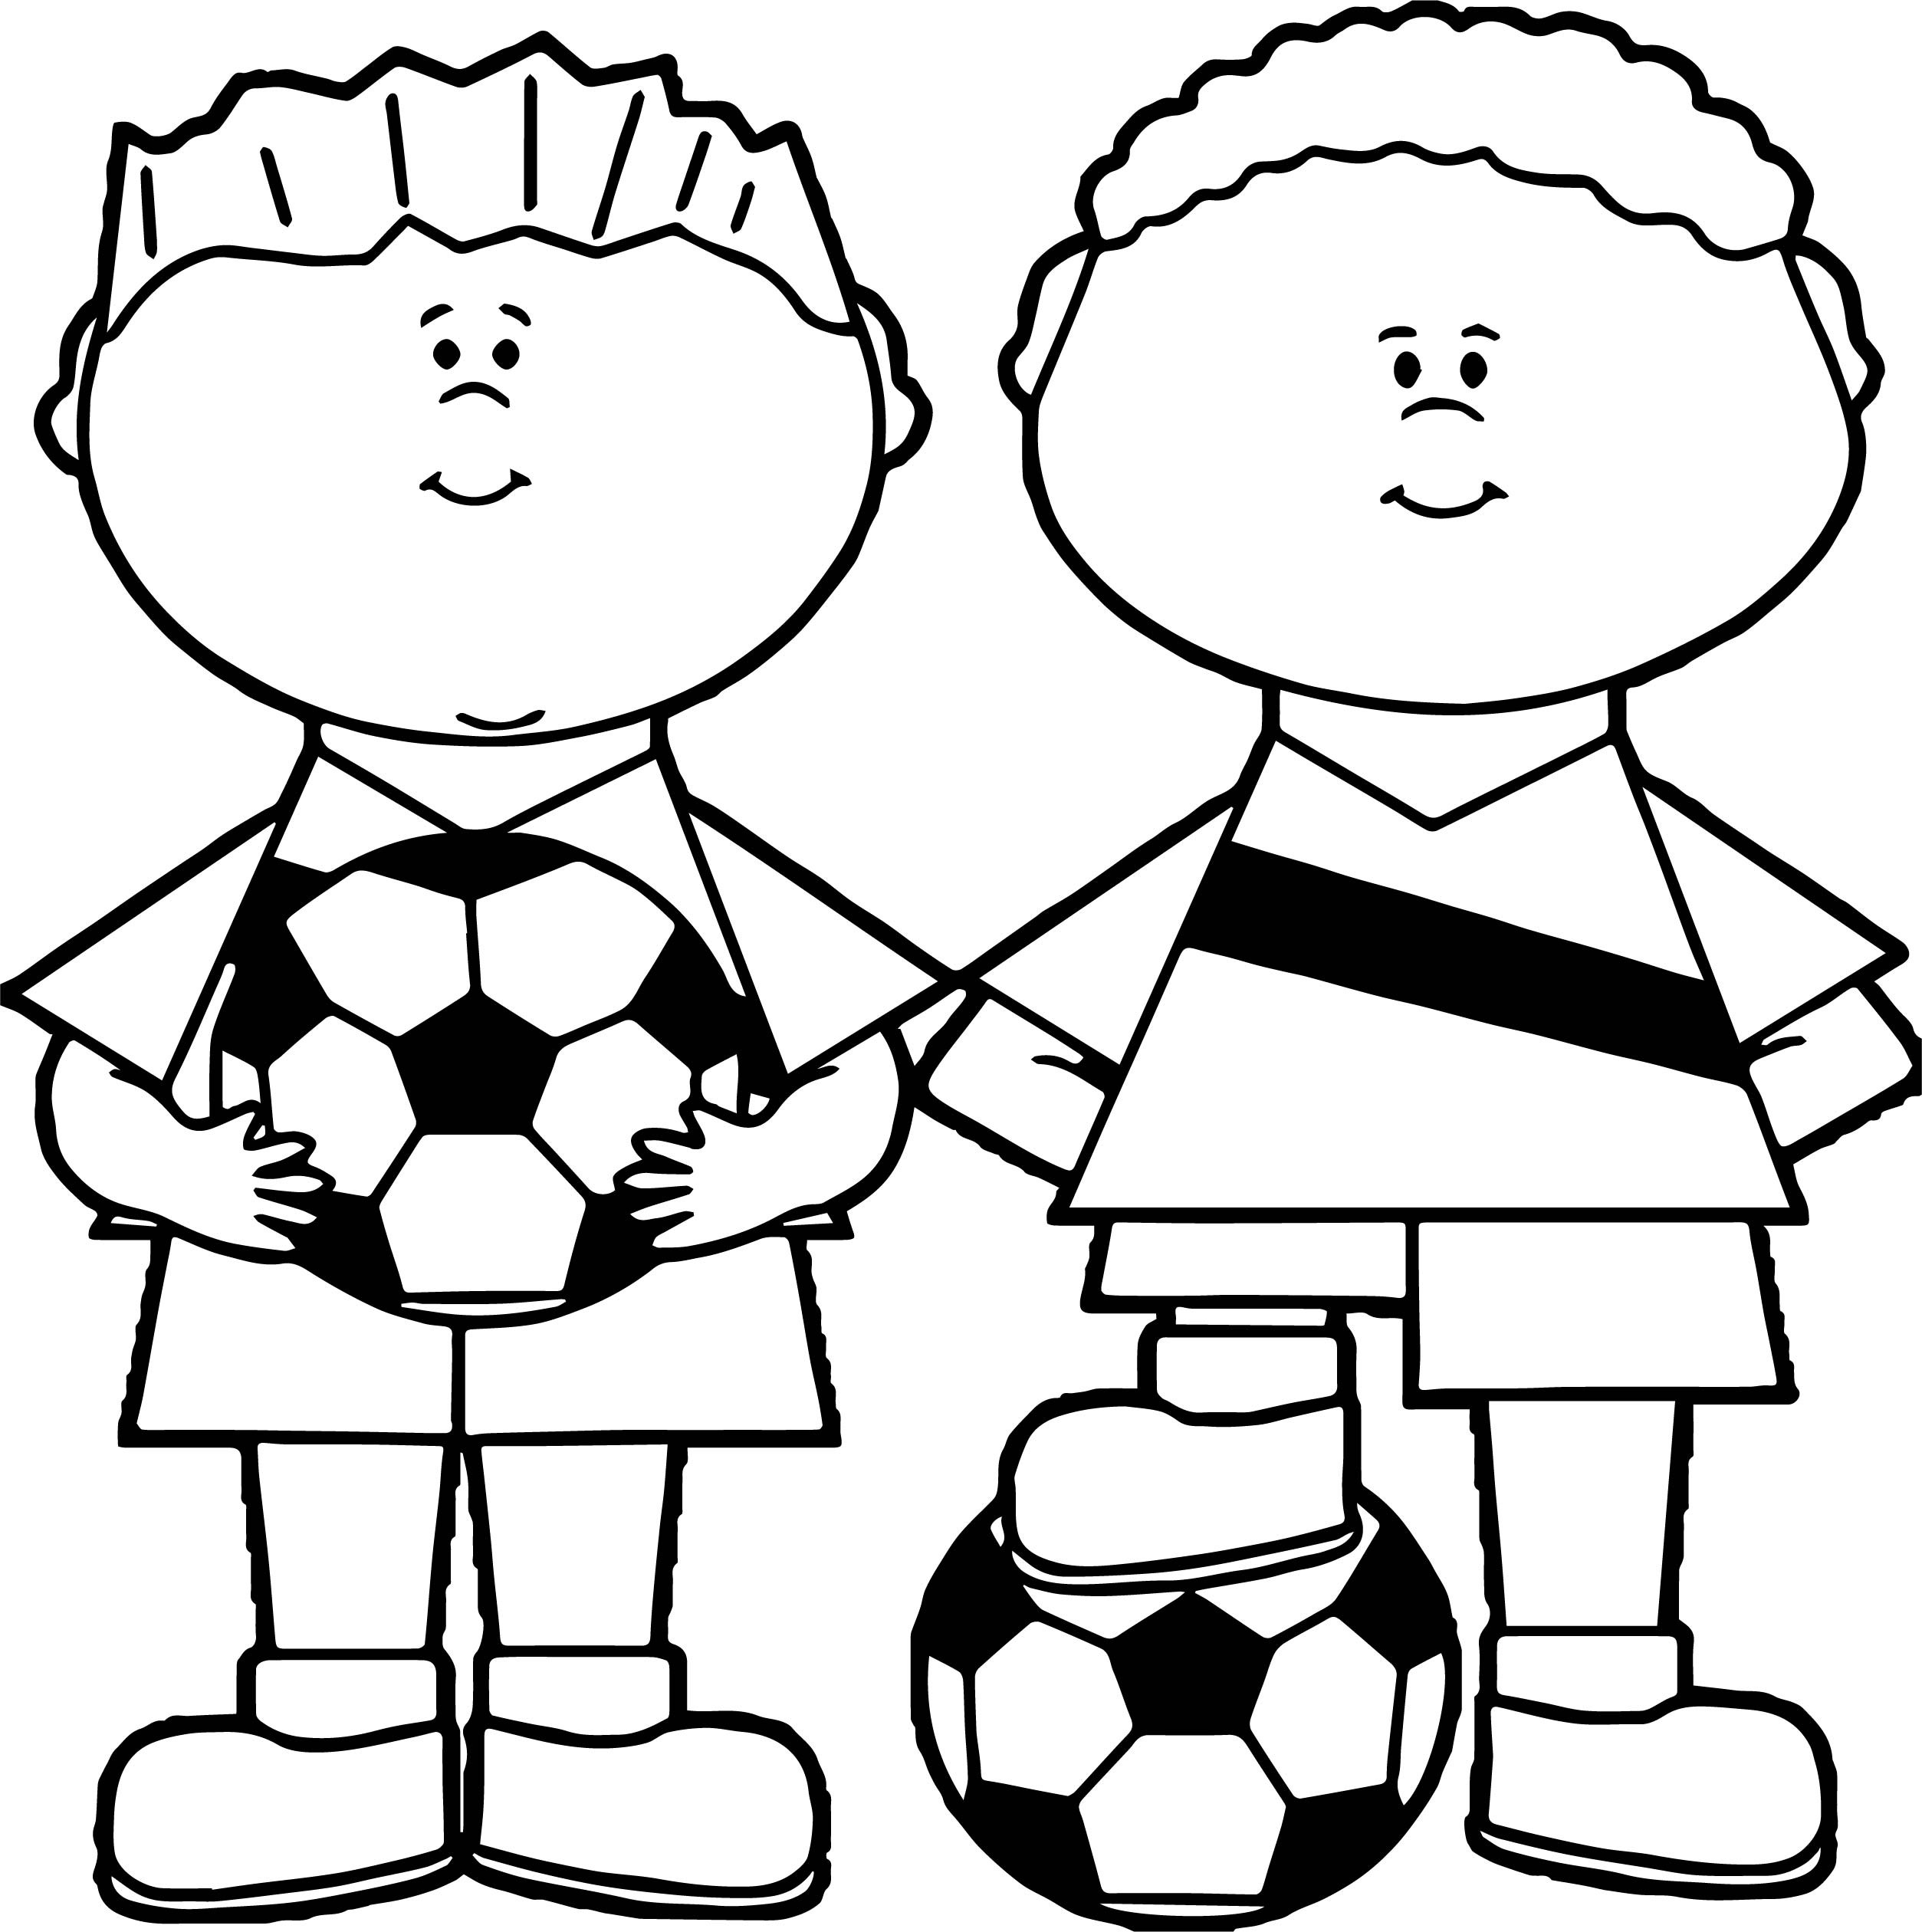 Coloring Pages For Boys Soccer
 Soccer Boys Coloring Page